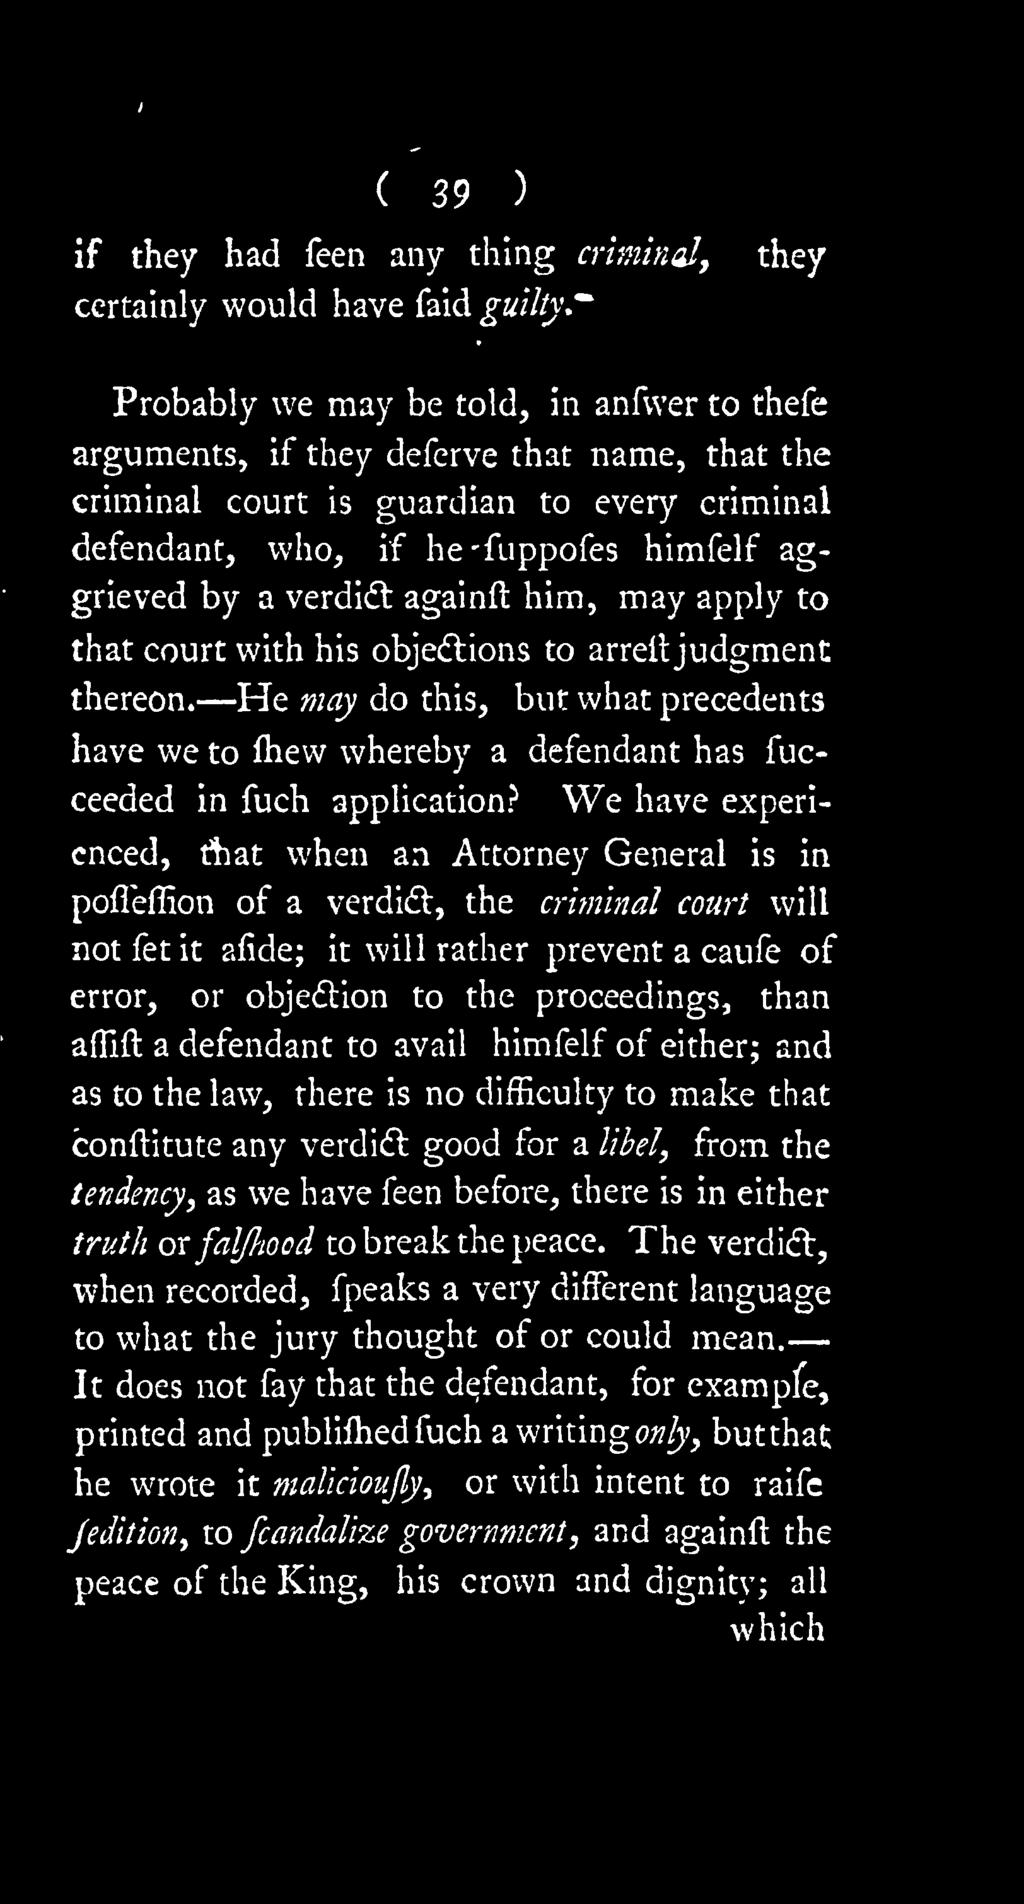 He may do this, but what precedents have we to fhevv whereby a defendant has fucceeded in fuch application?